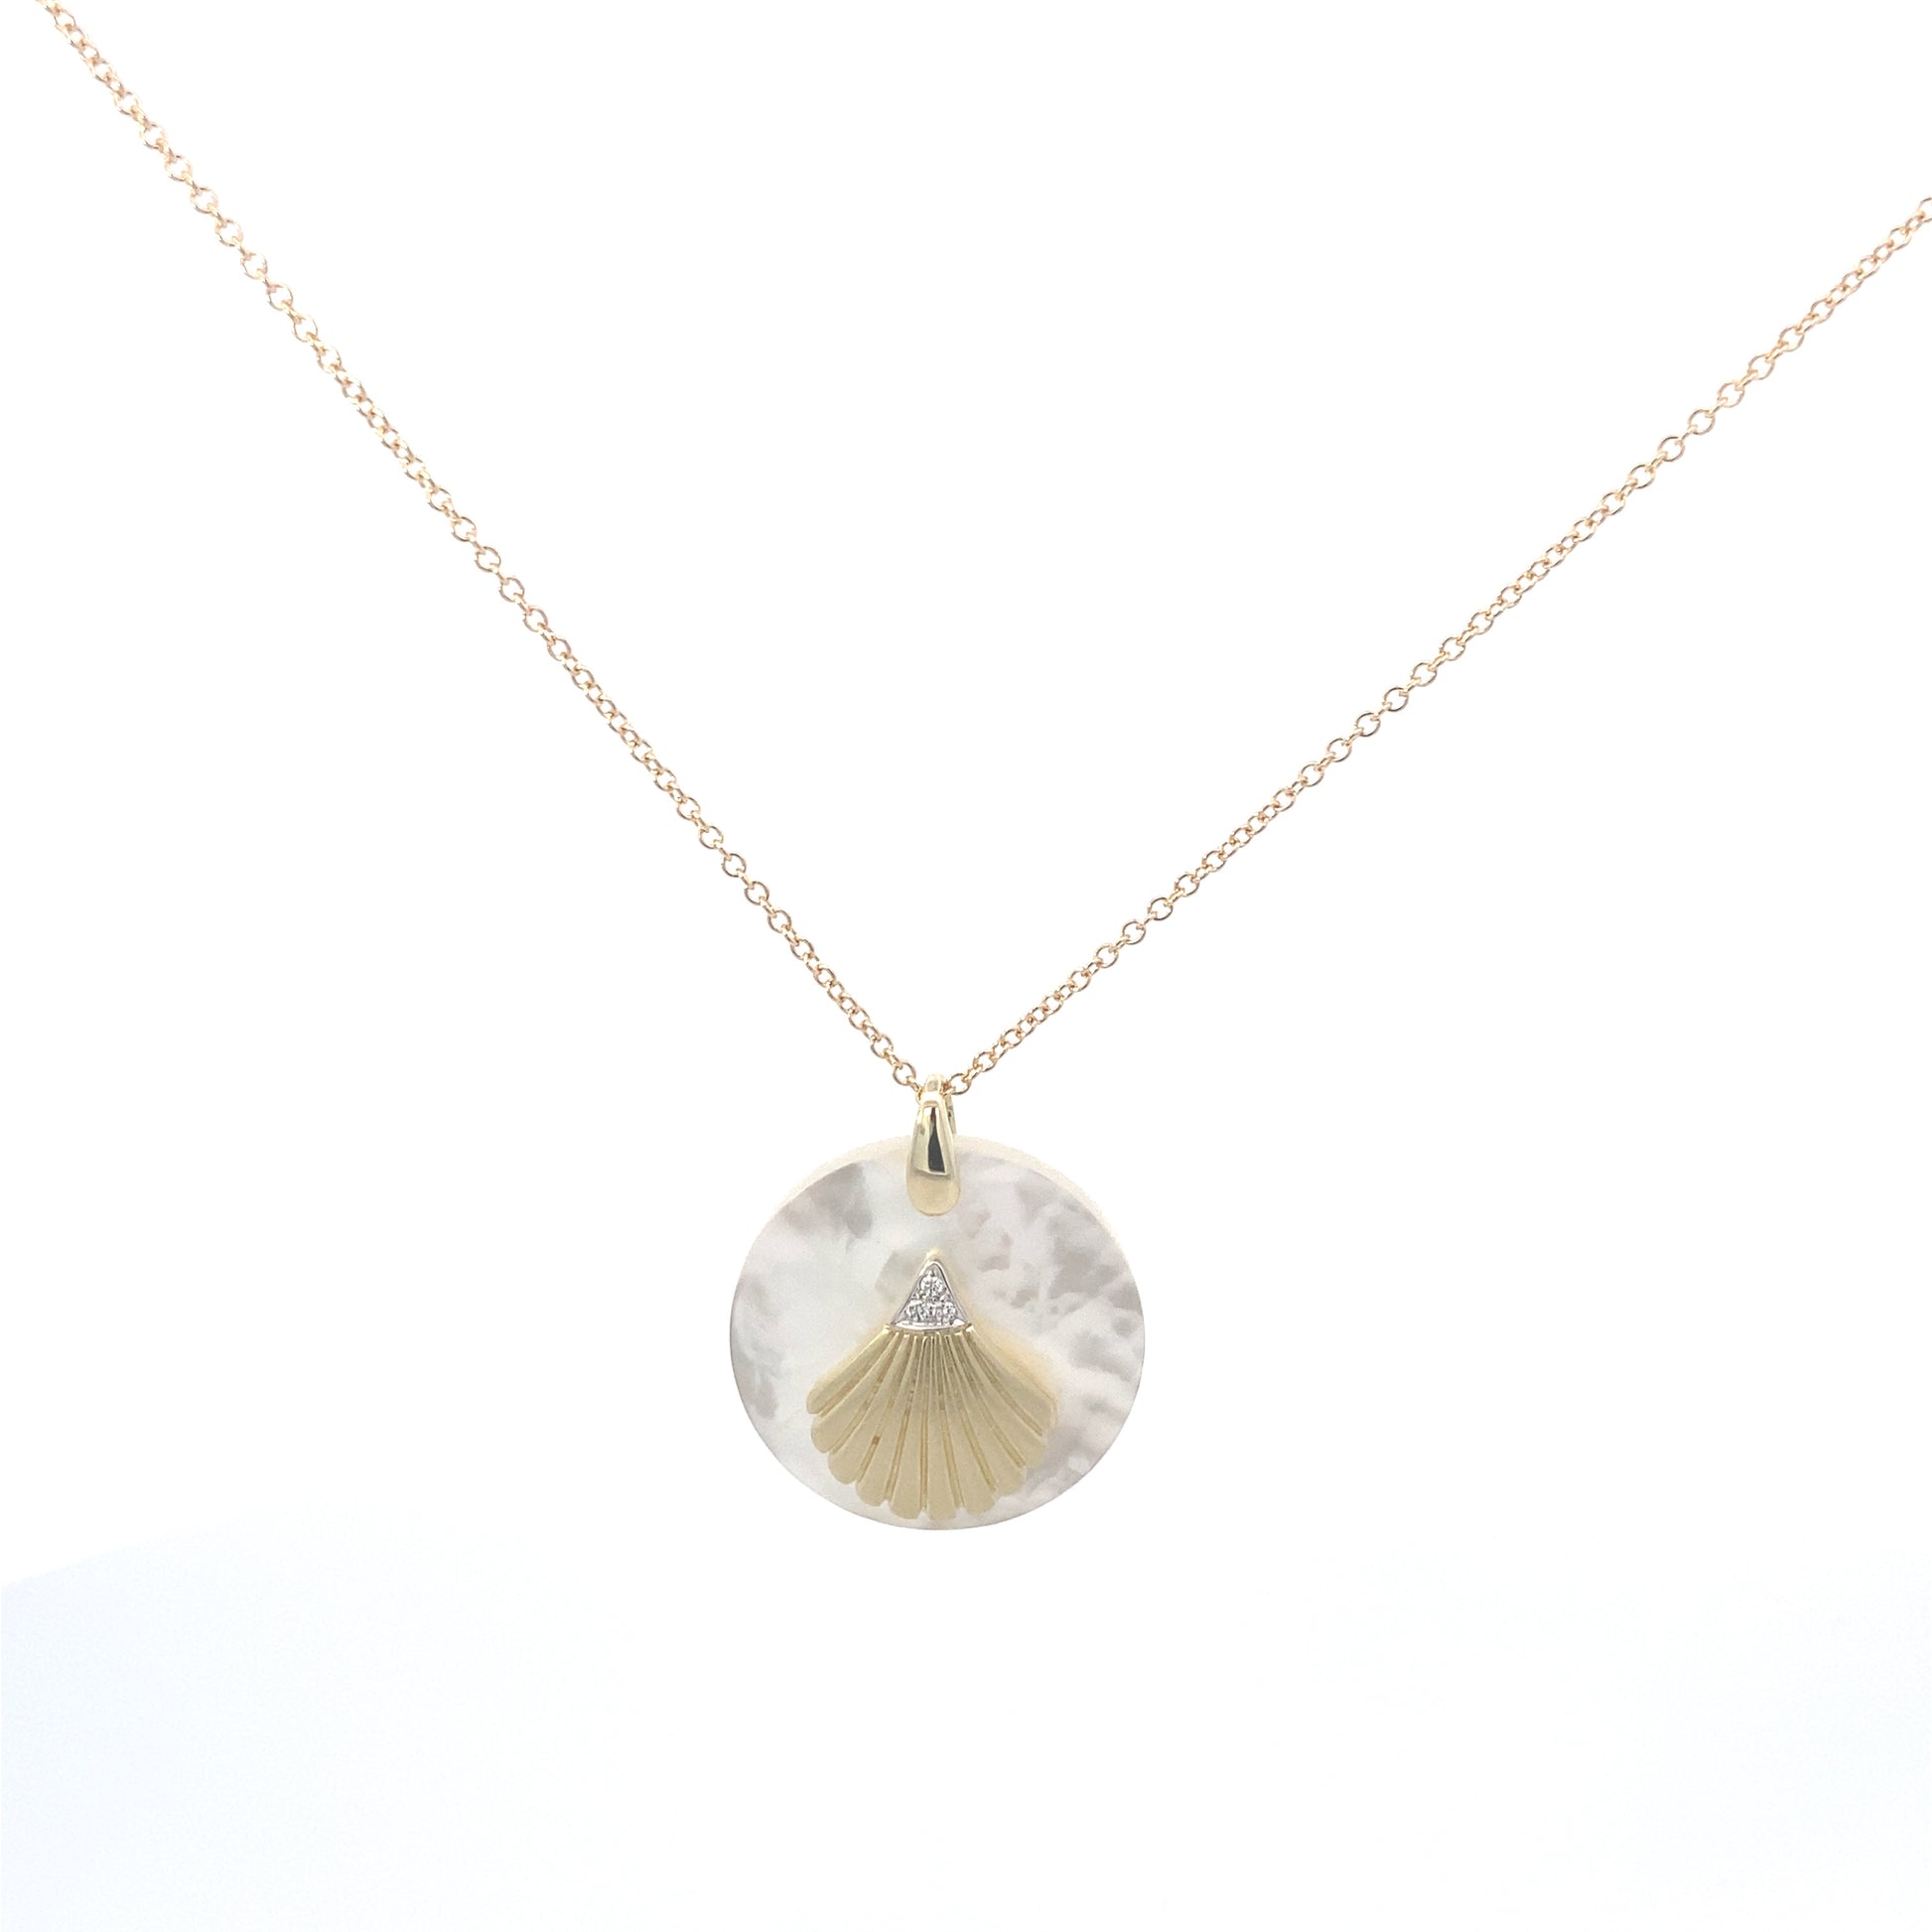 Mother of Pearl Amulette Pendant | Zeghani | Luby 